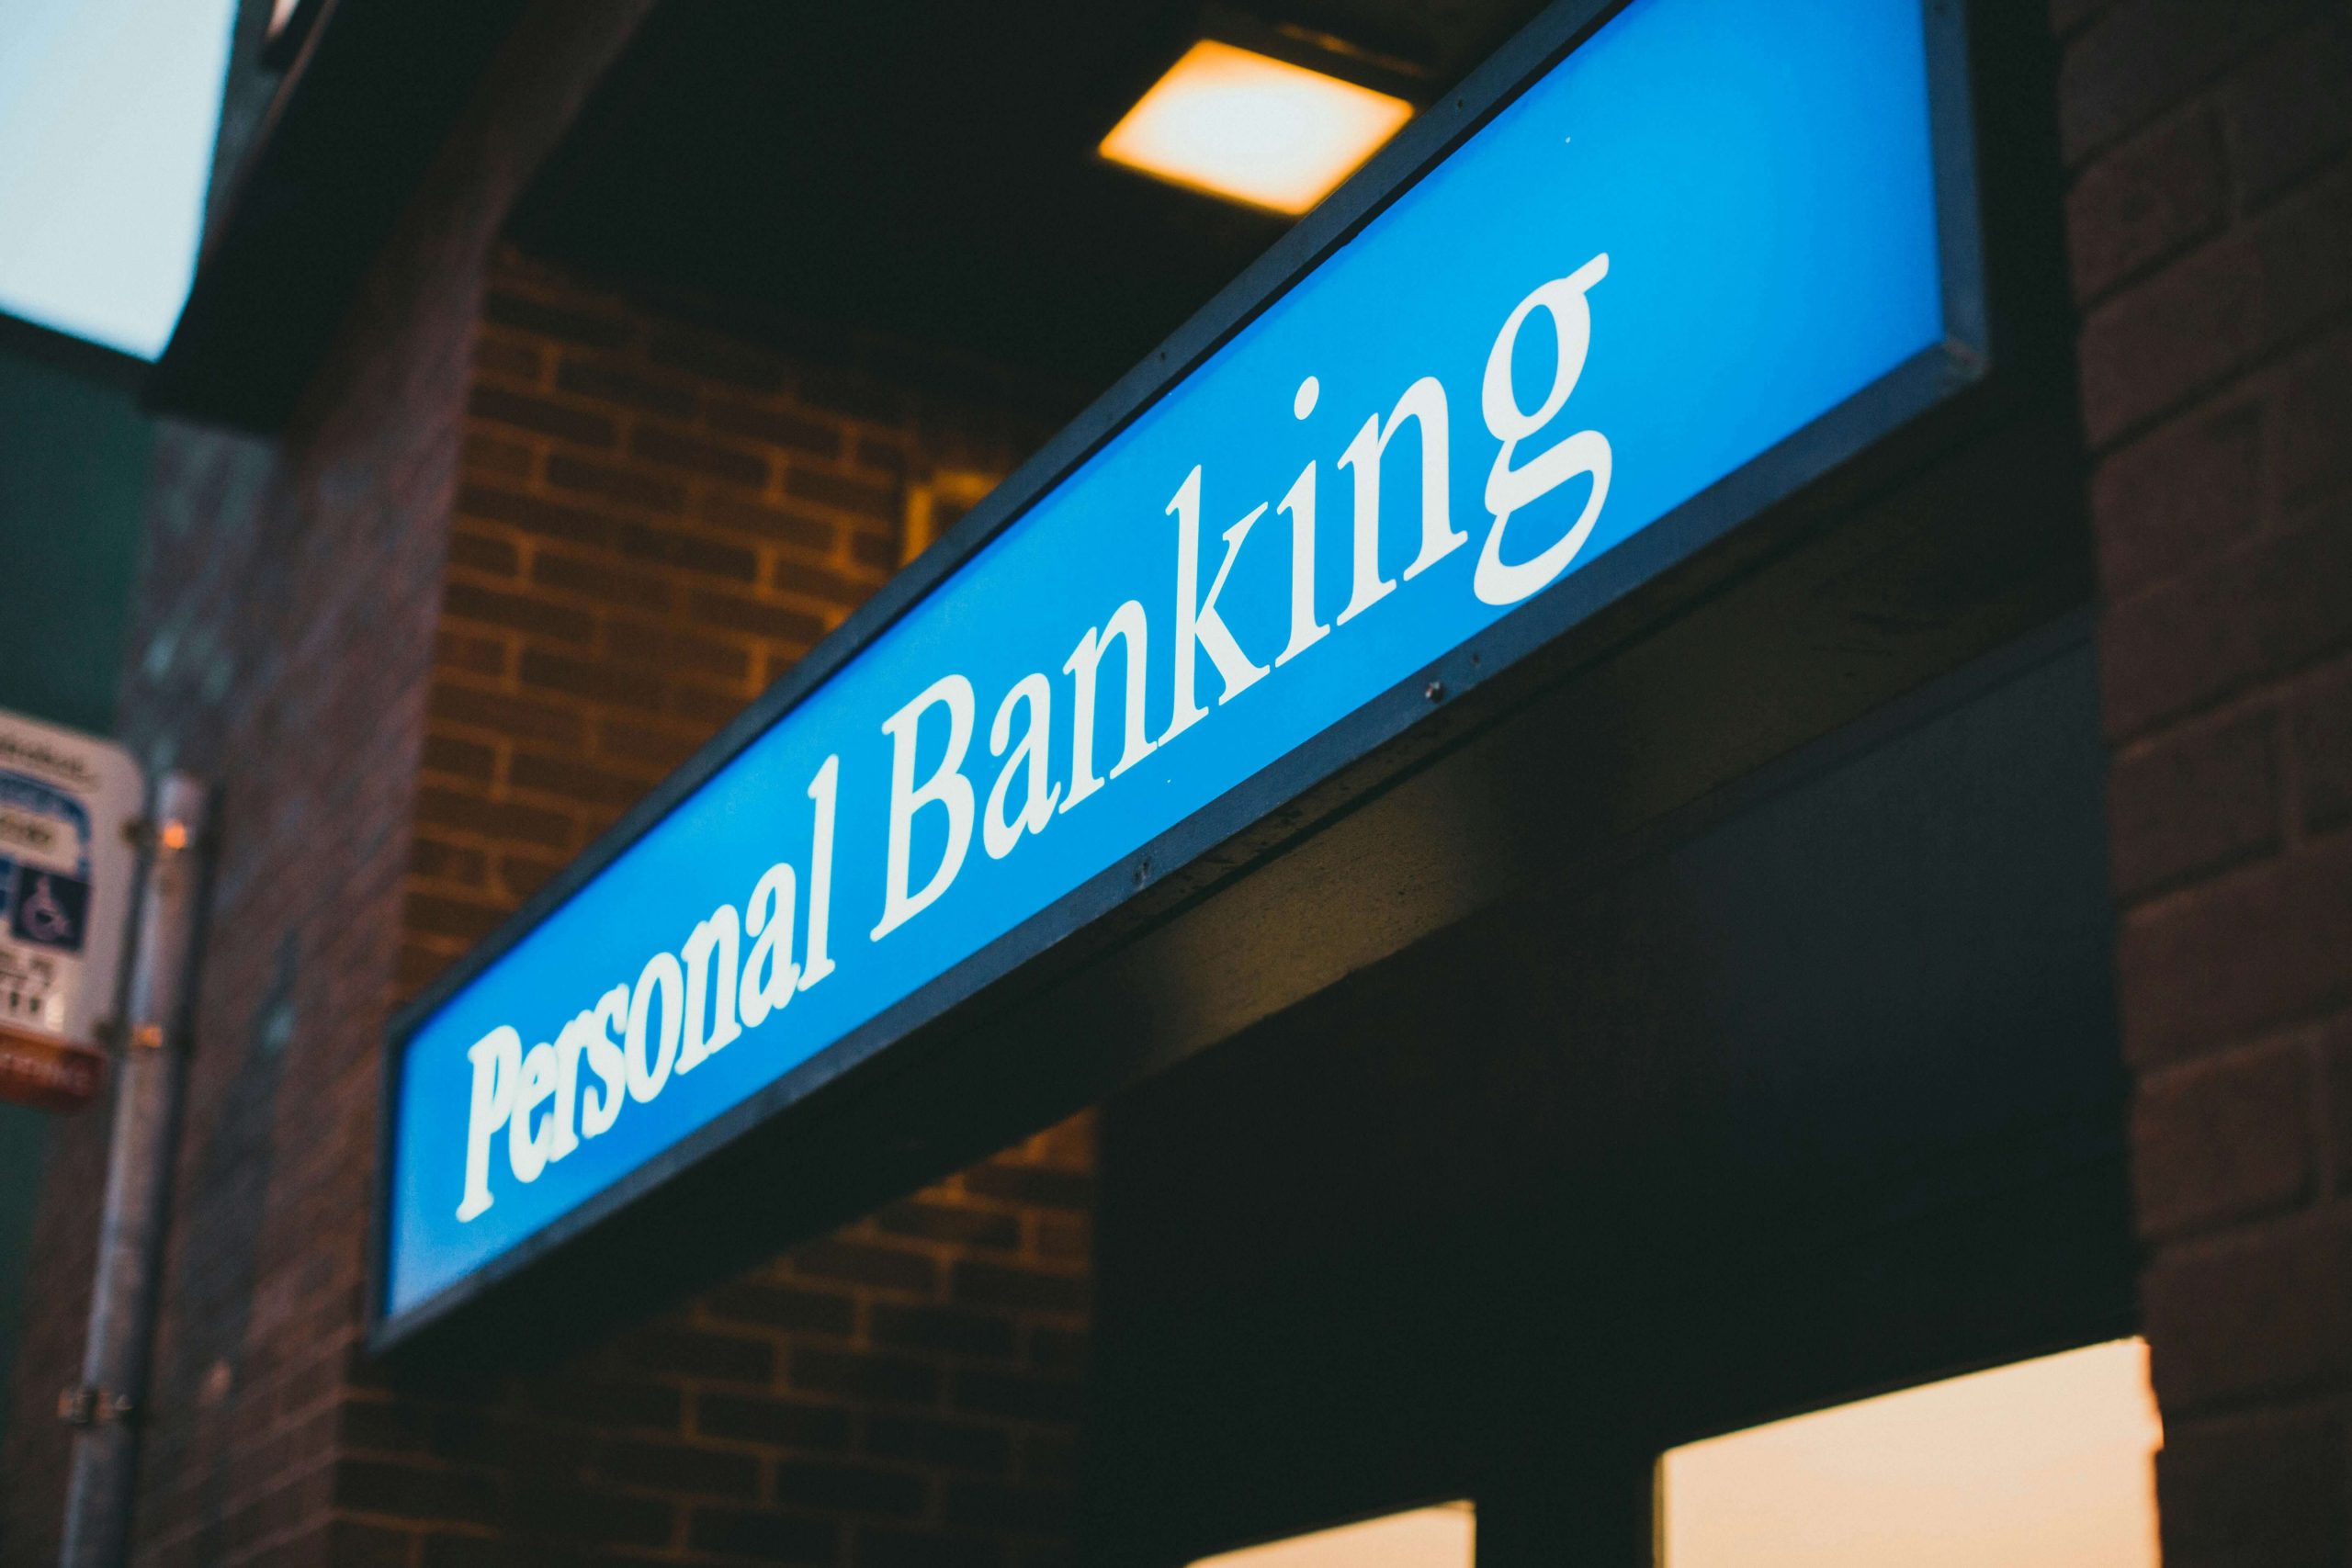 image of the personal banking sign at a high street bank